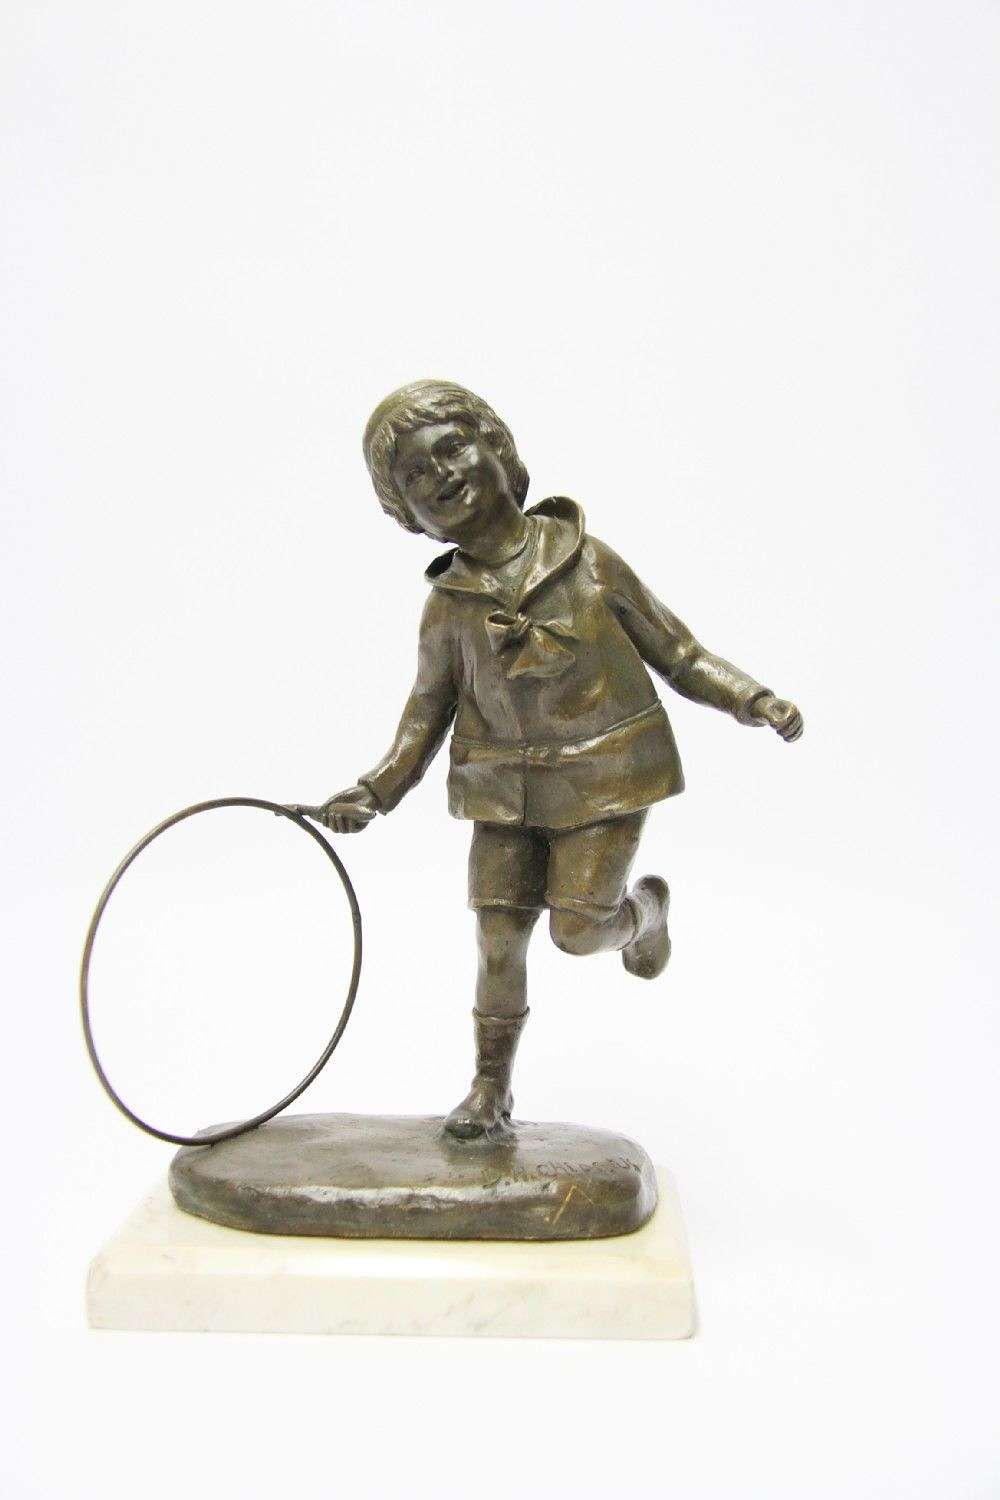 A Delightful Bronze Study Of A Young Boy Playing With A Hoop And Stick